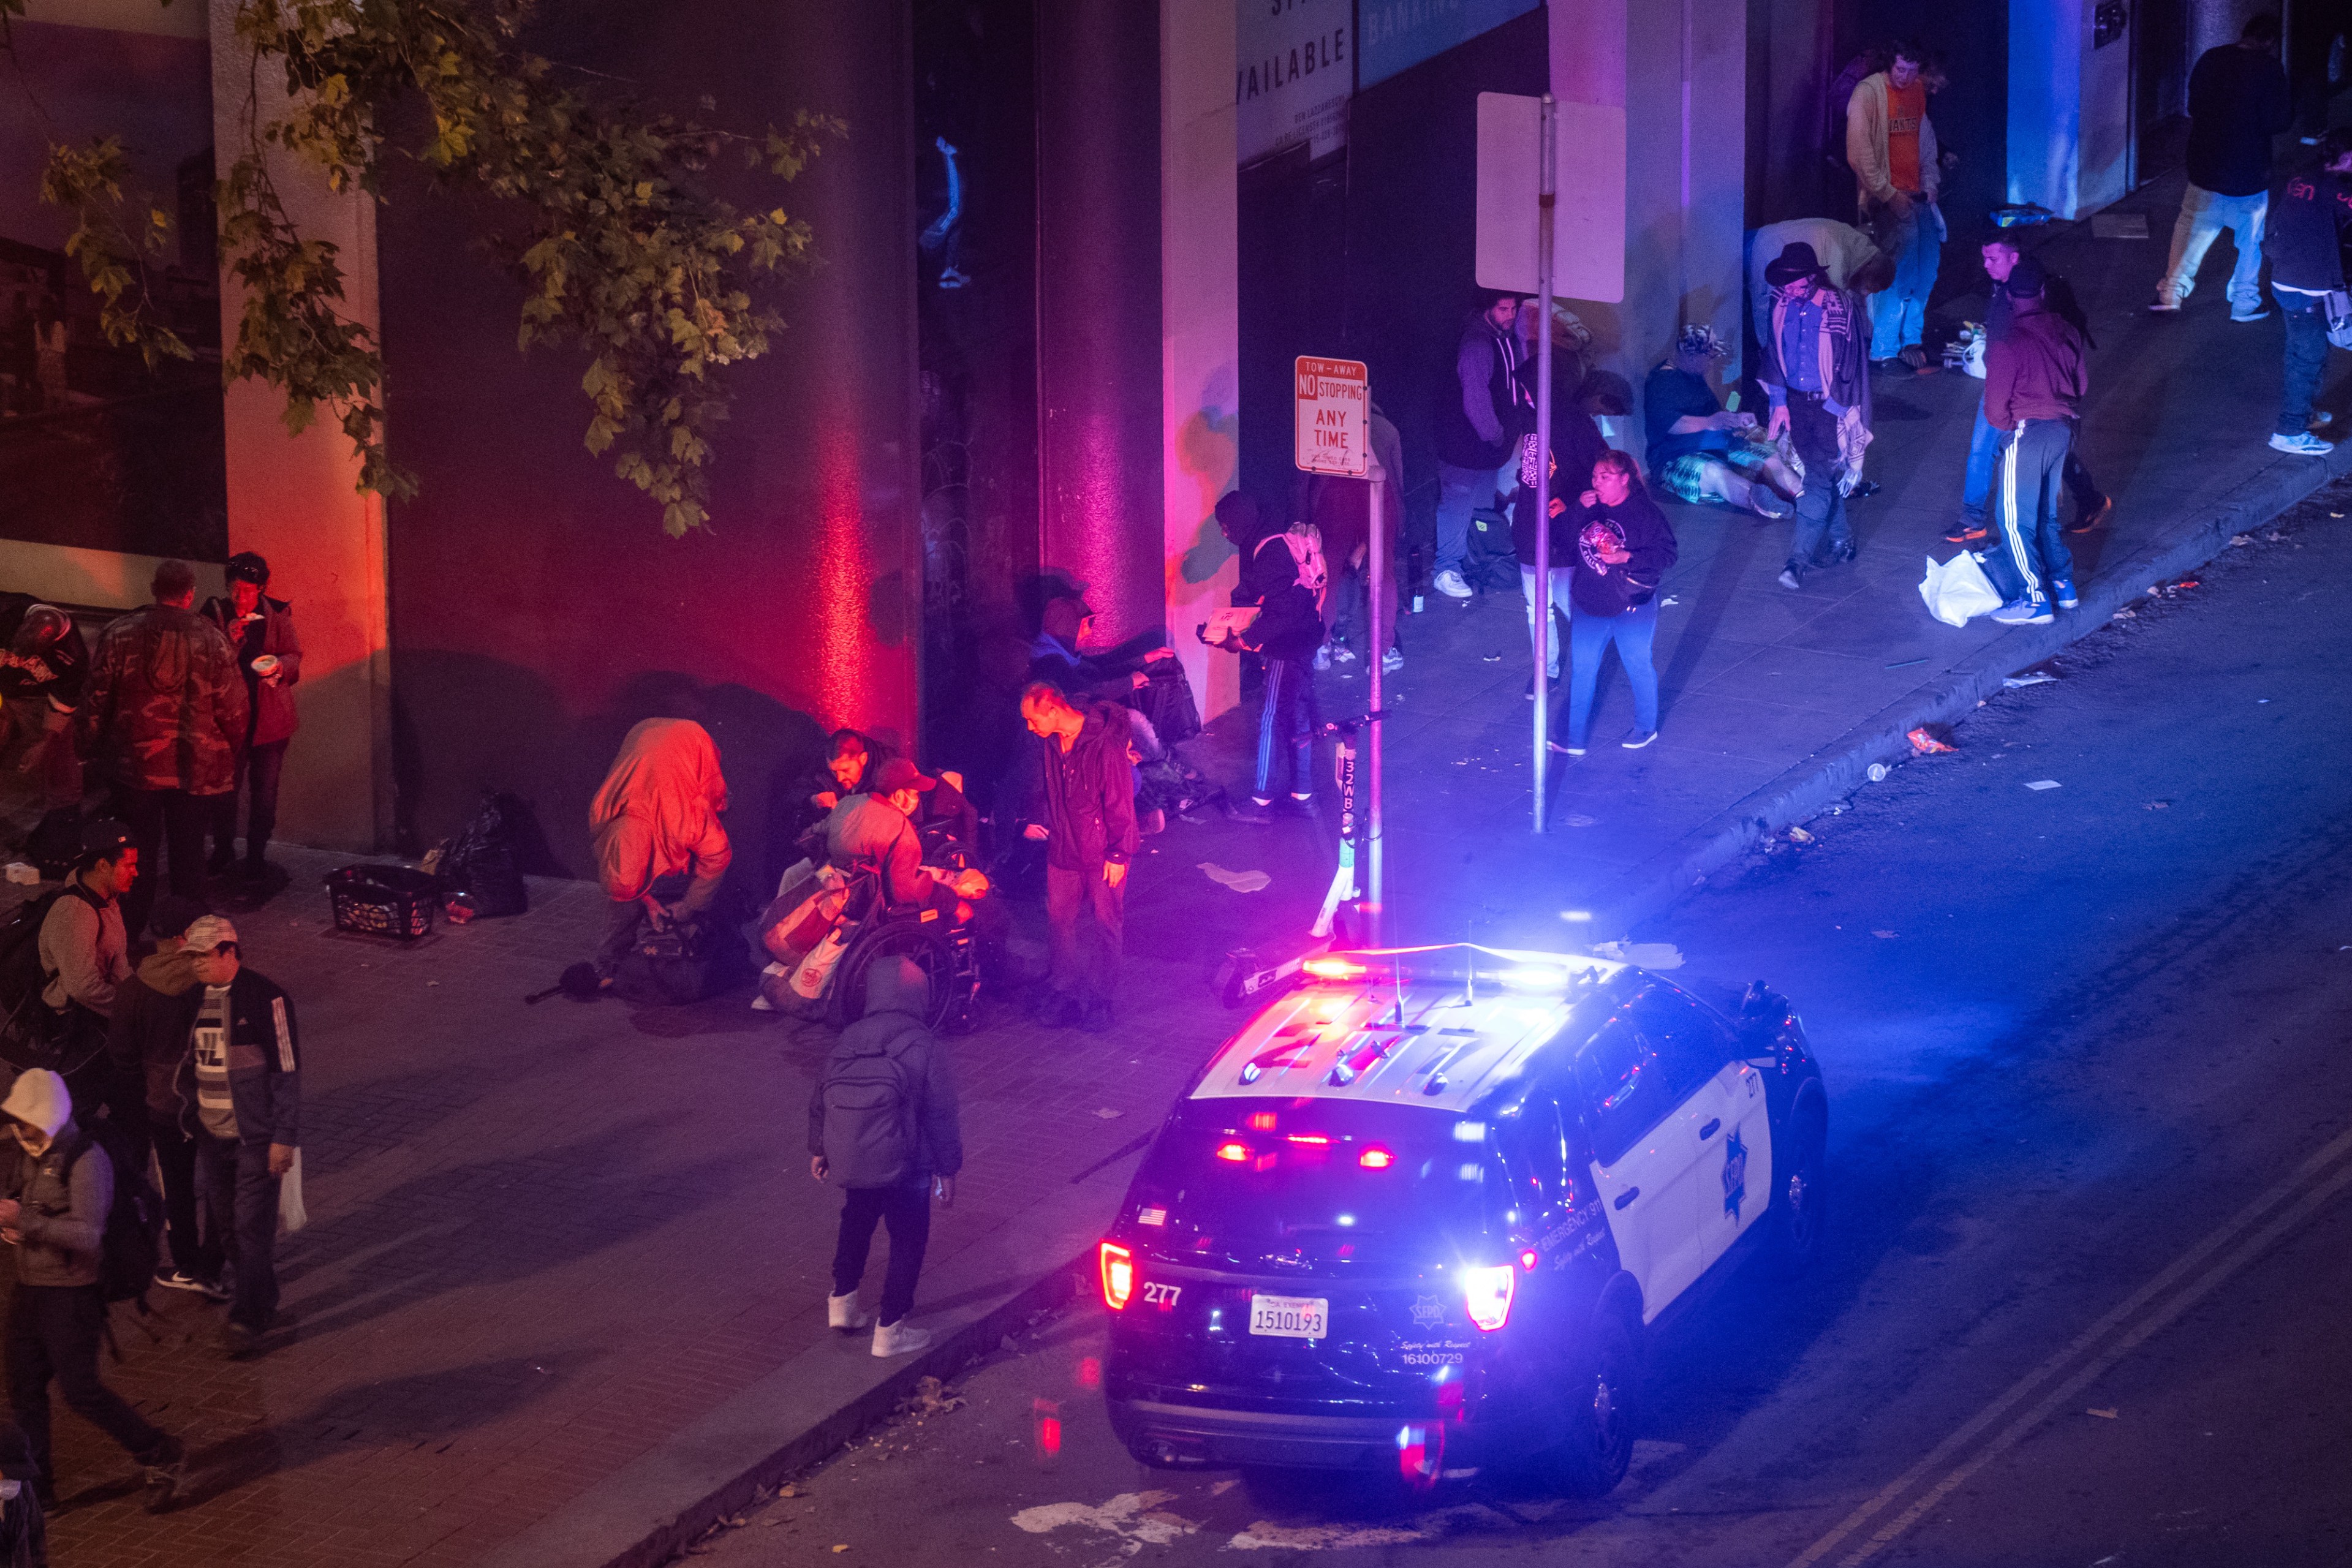 San Francisco police have arrested 1,749 people since May in the crackdown operations aiming to shut down open-air drug markets in the Tenderloin and SoMa neighborhoods.